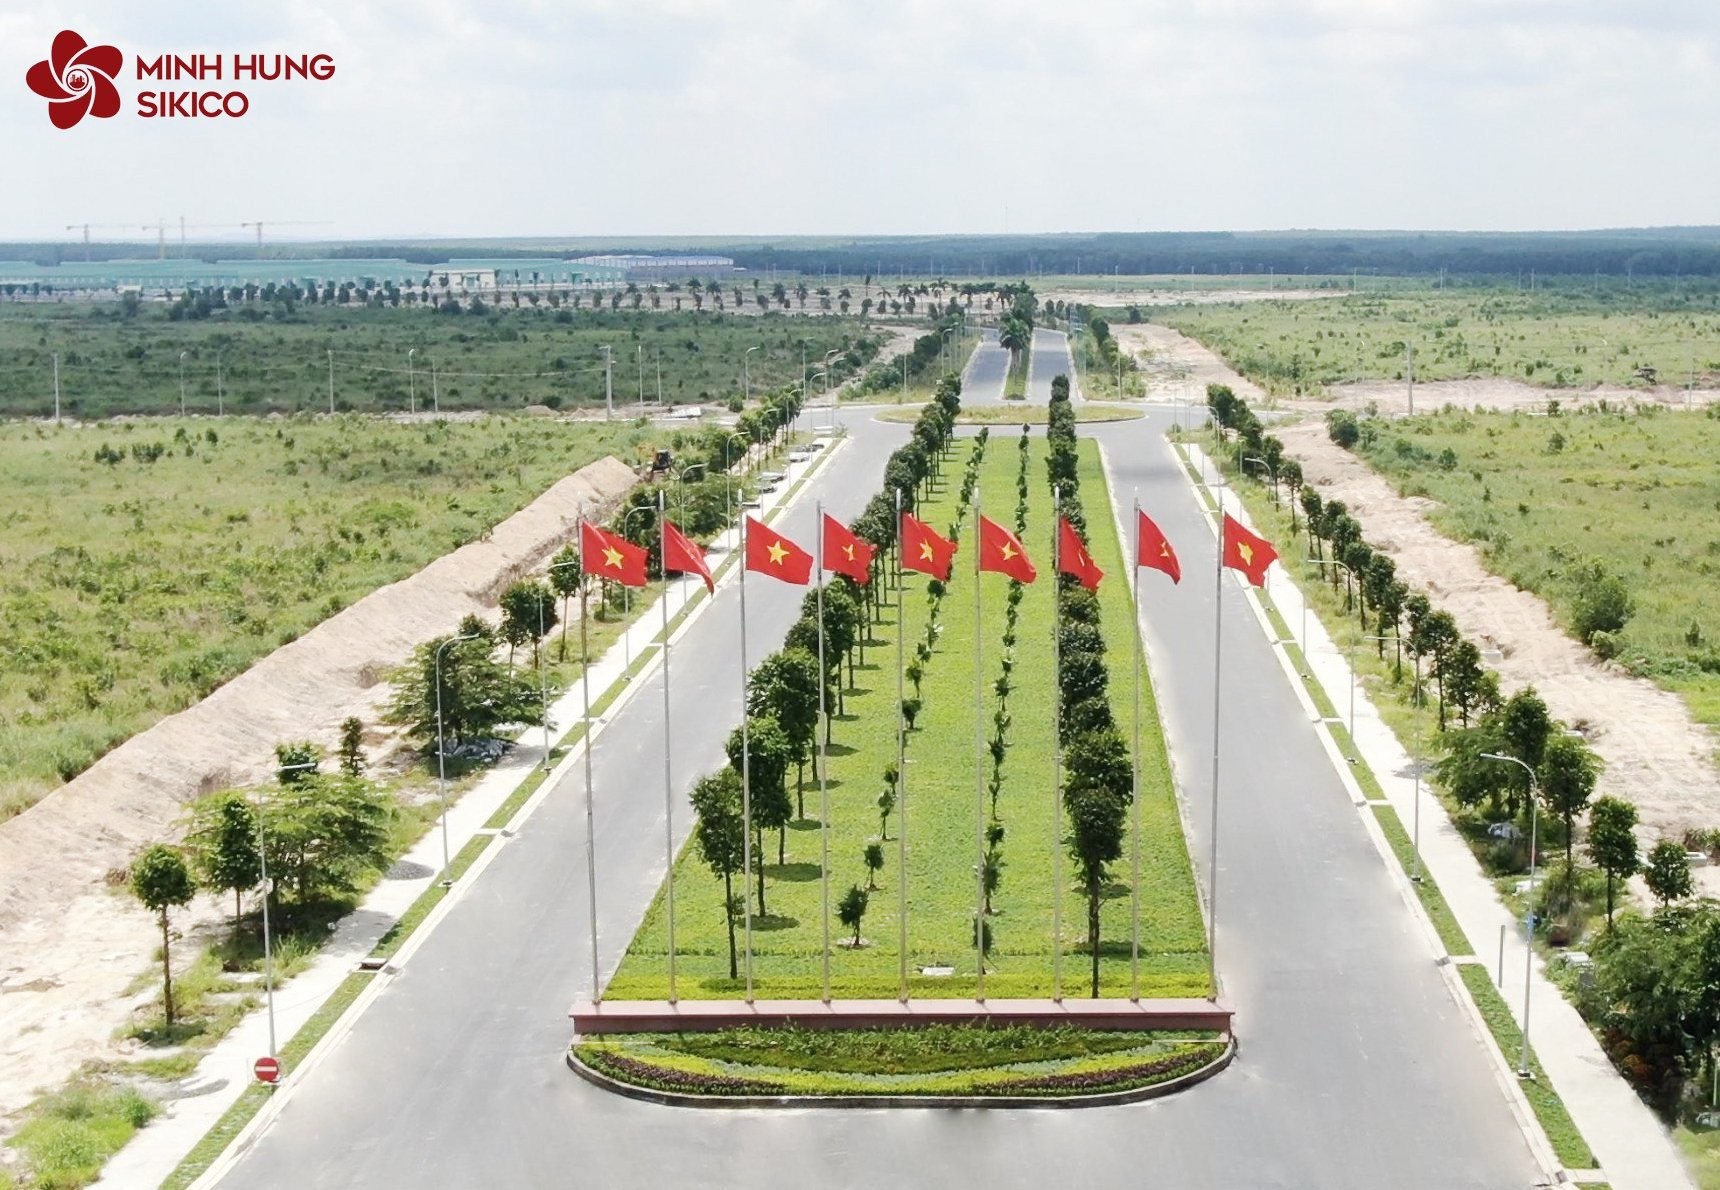 MINH HUNG SIKICO Industrial Park Infrastructure Sep/2022